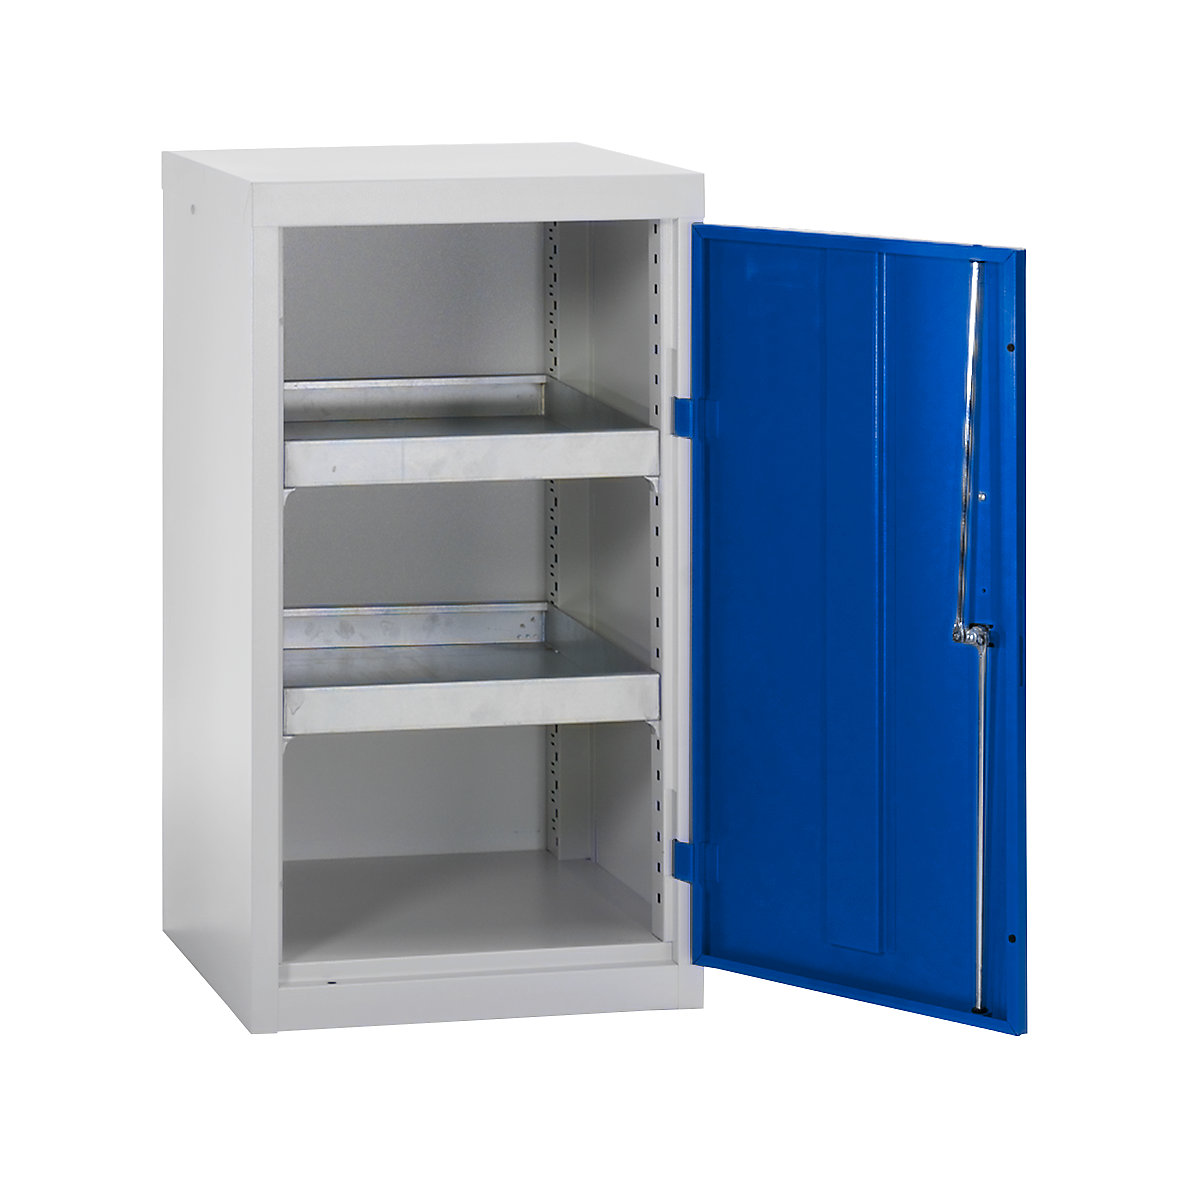 Environmental cupboard without door perforations, HxWxD 900 x 500 x 500 mm, 2 tray shelves, light grey / gentian blue-5